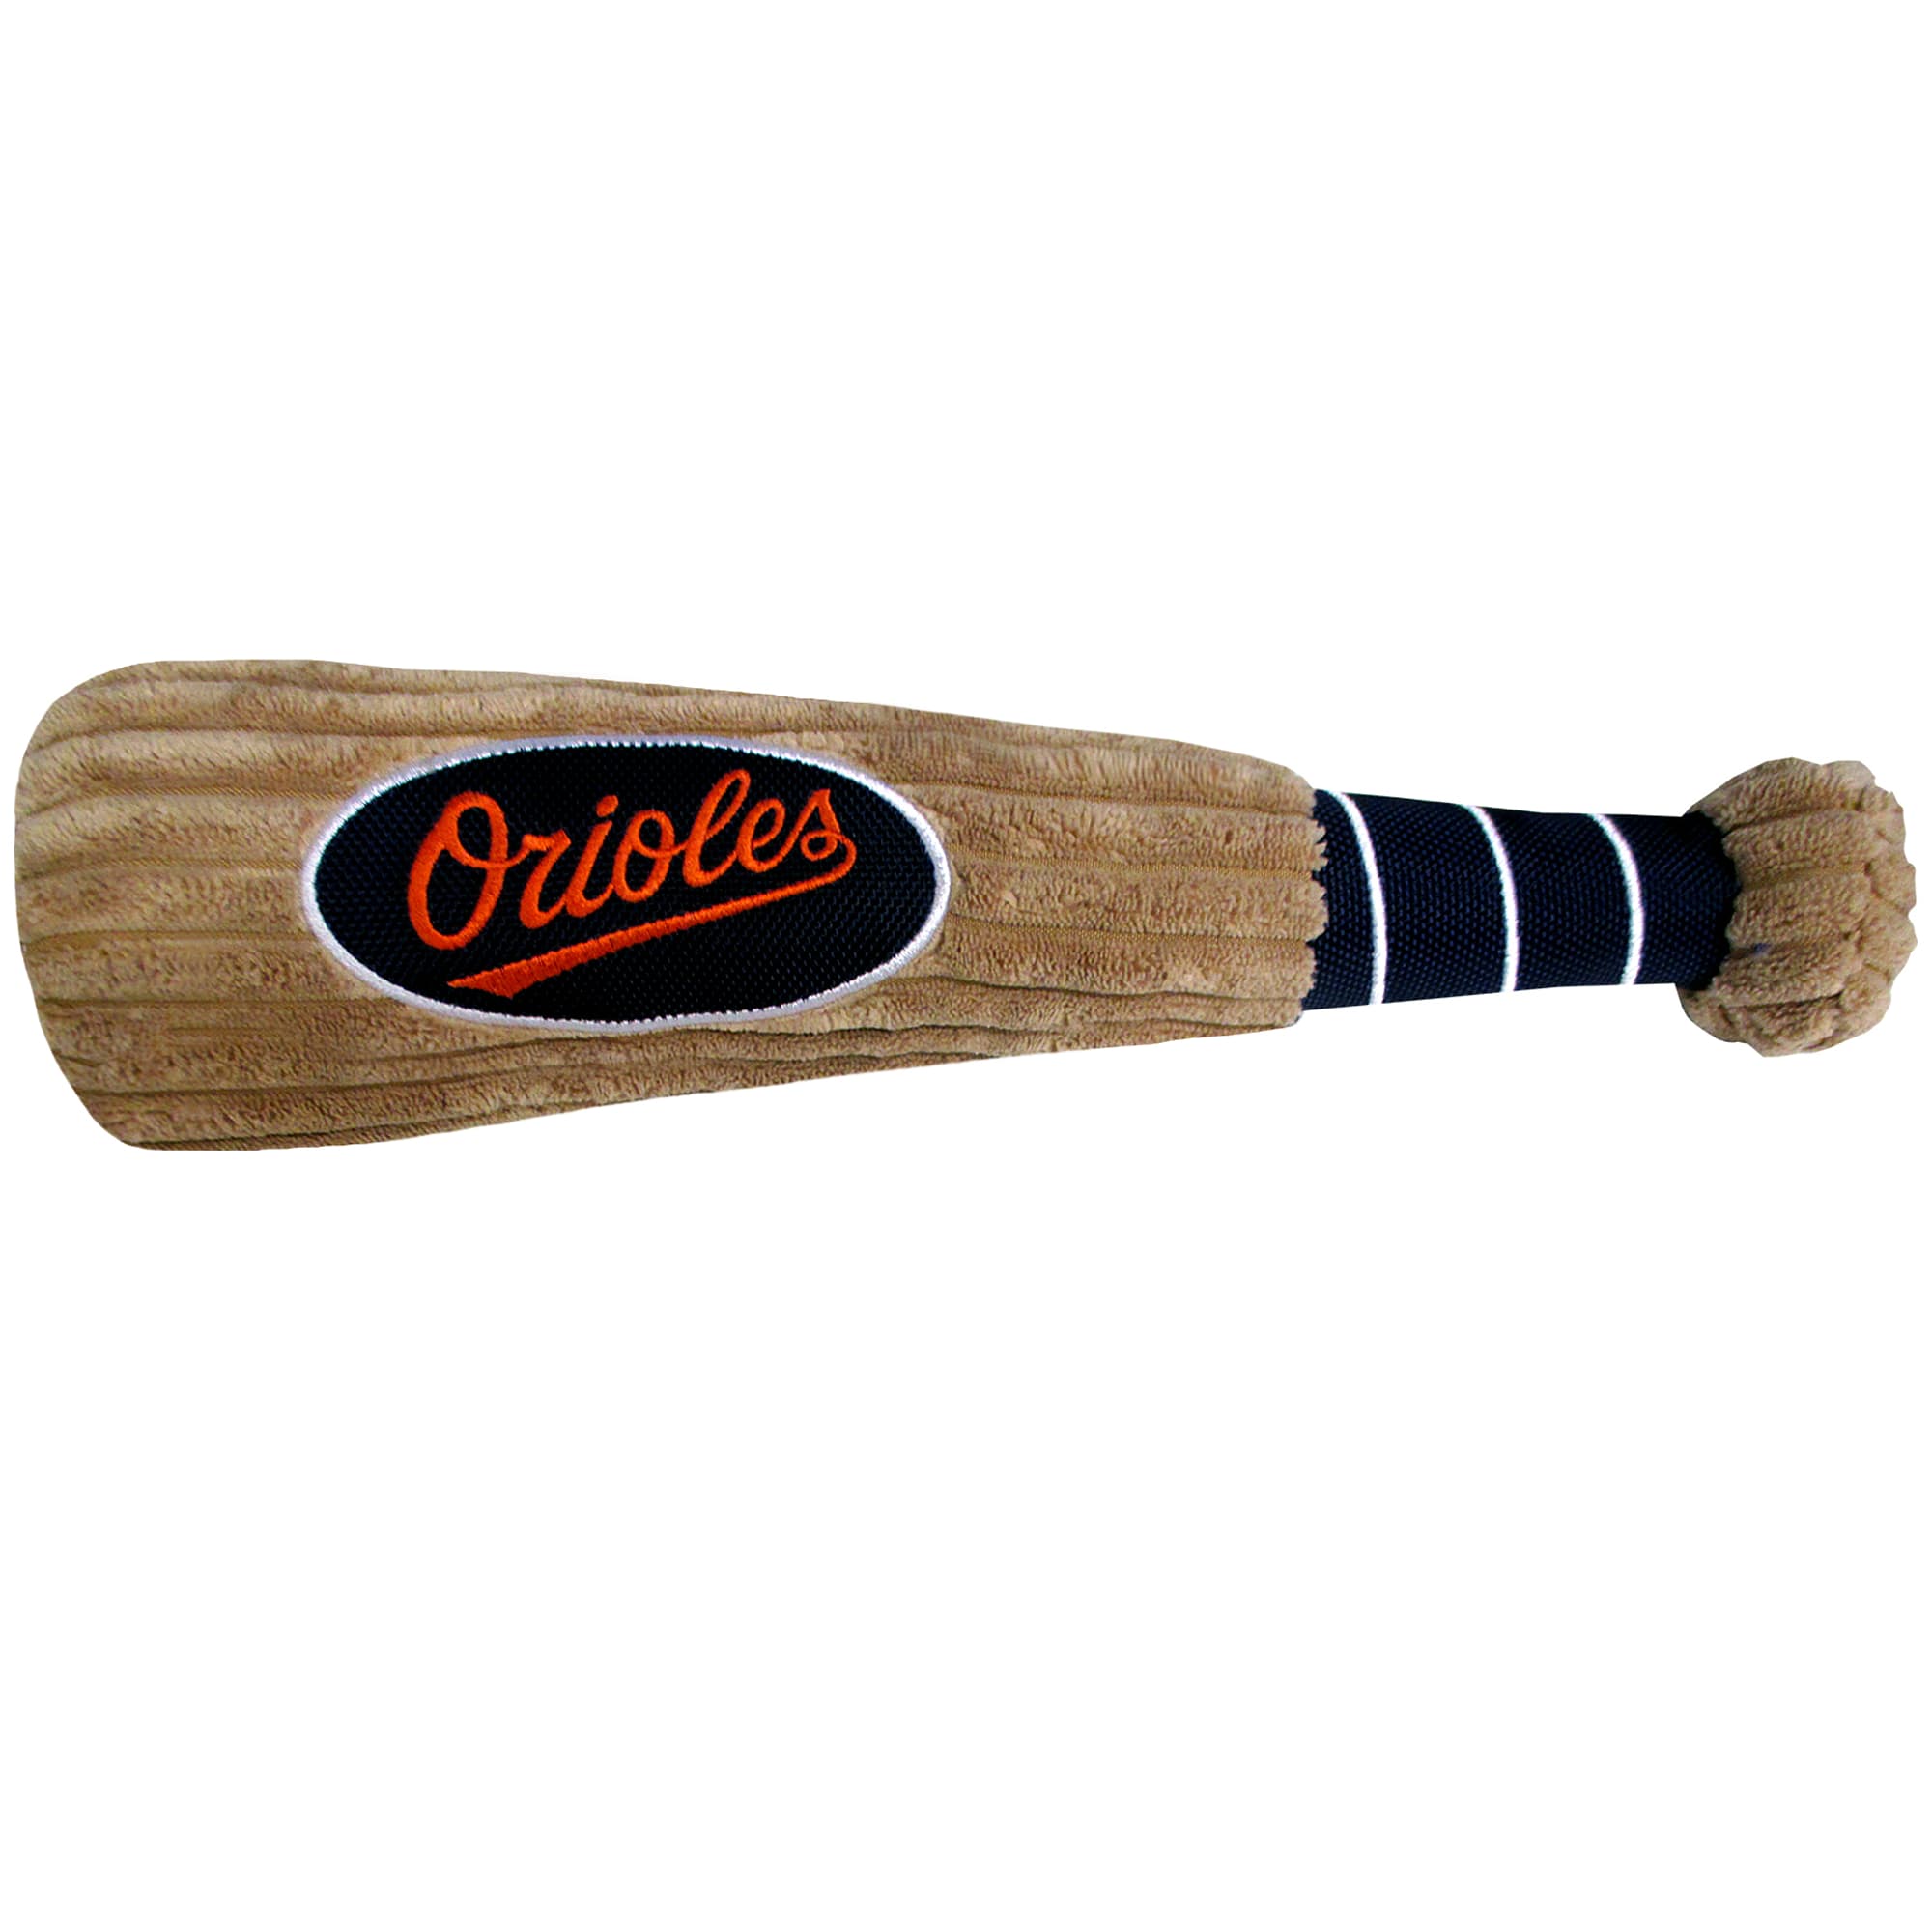 Official Baltimore Orioles Pet Gear, Orioles Collars, Leashes